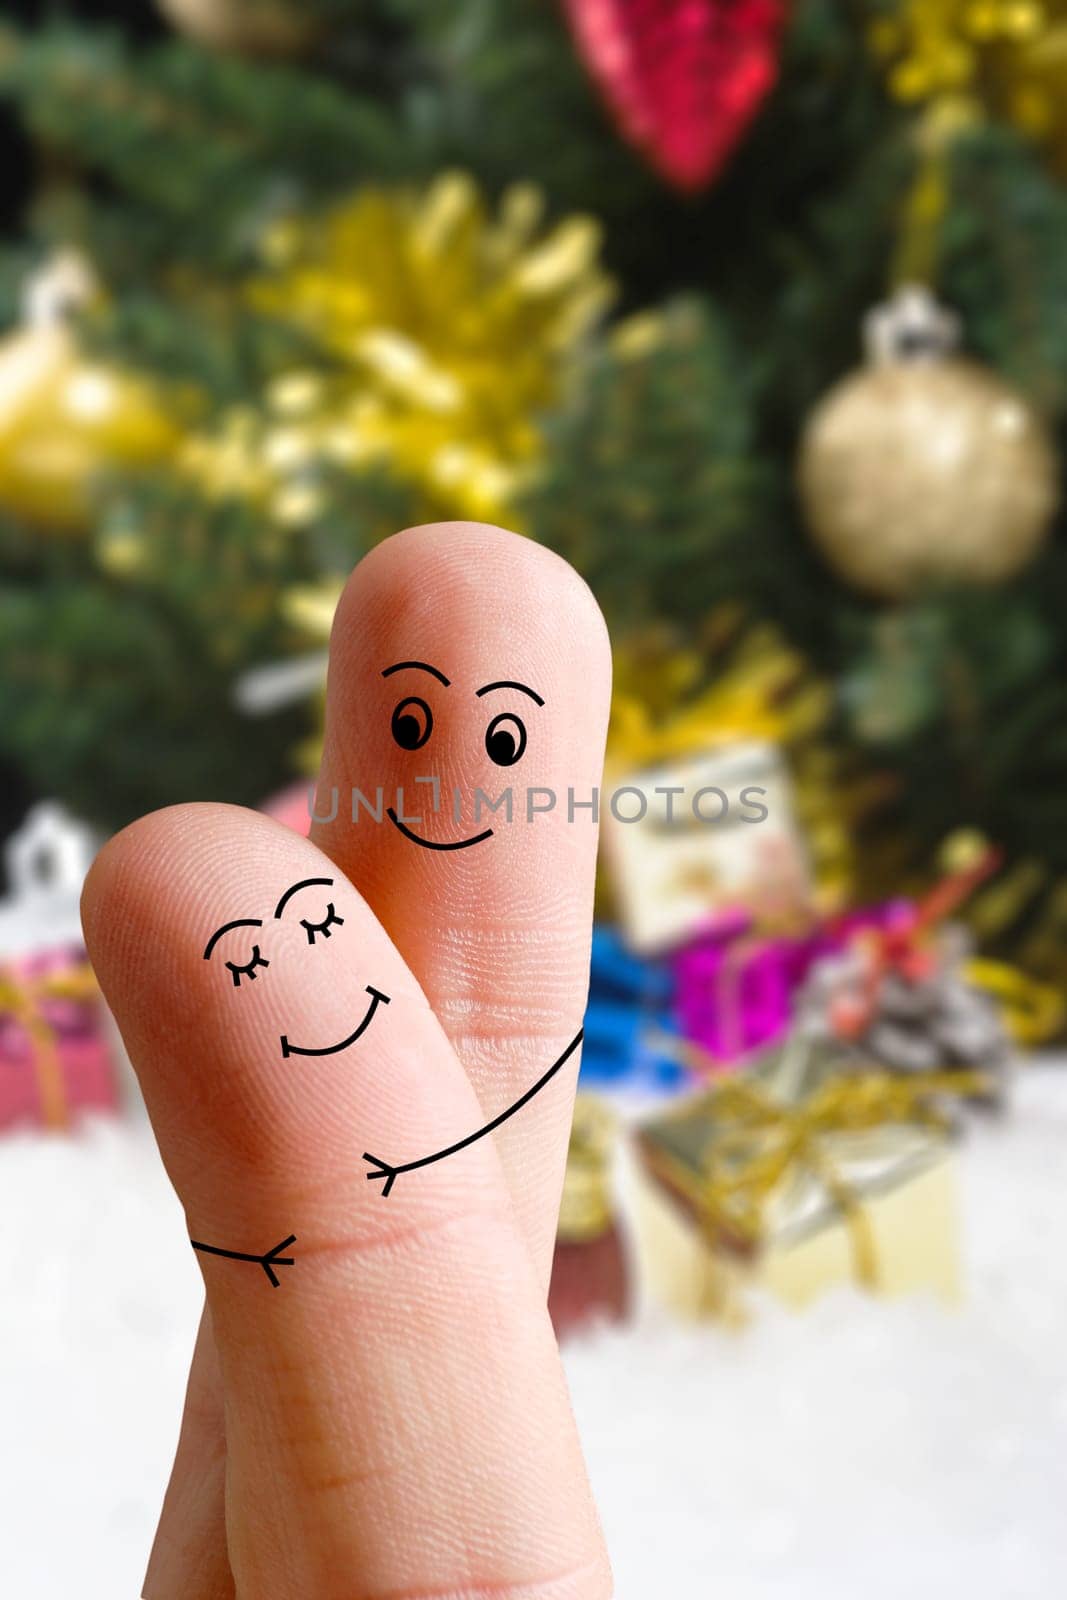 Faces of fingers hugging each other isolated on Christmas decorated background. Happy family celebrating Christmas day concept by Sonat